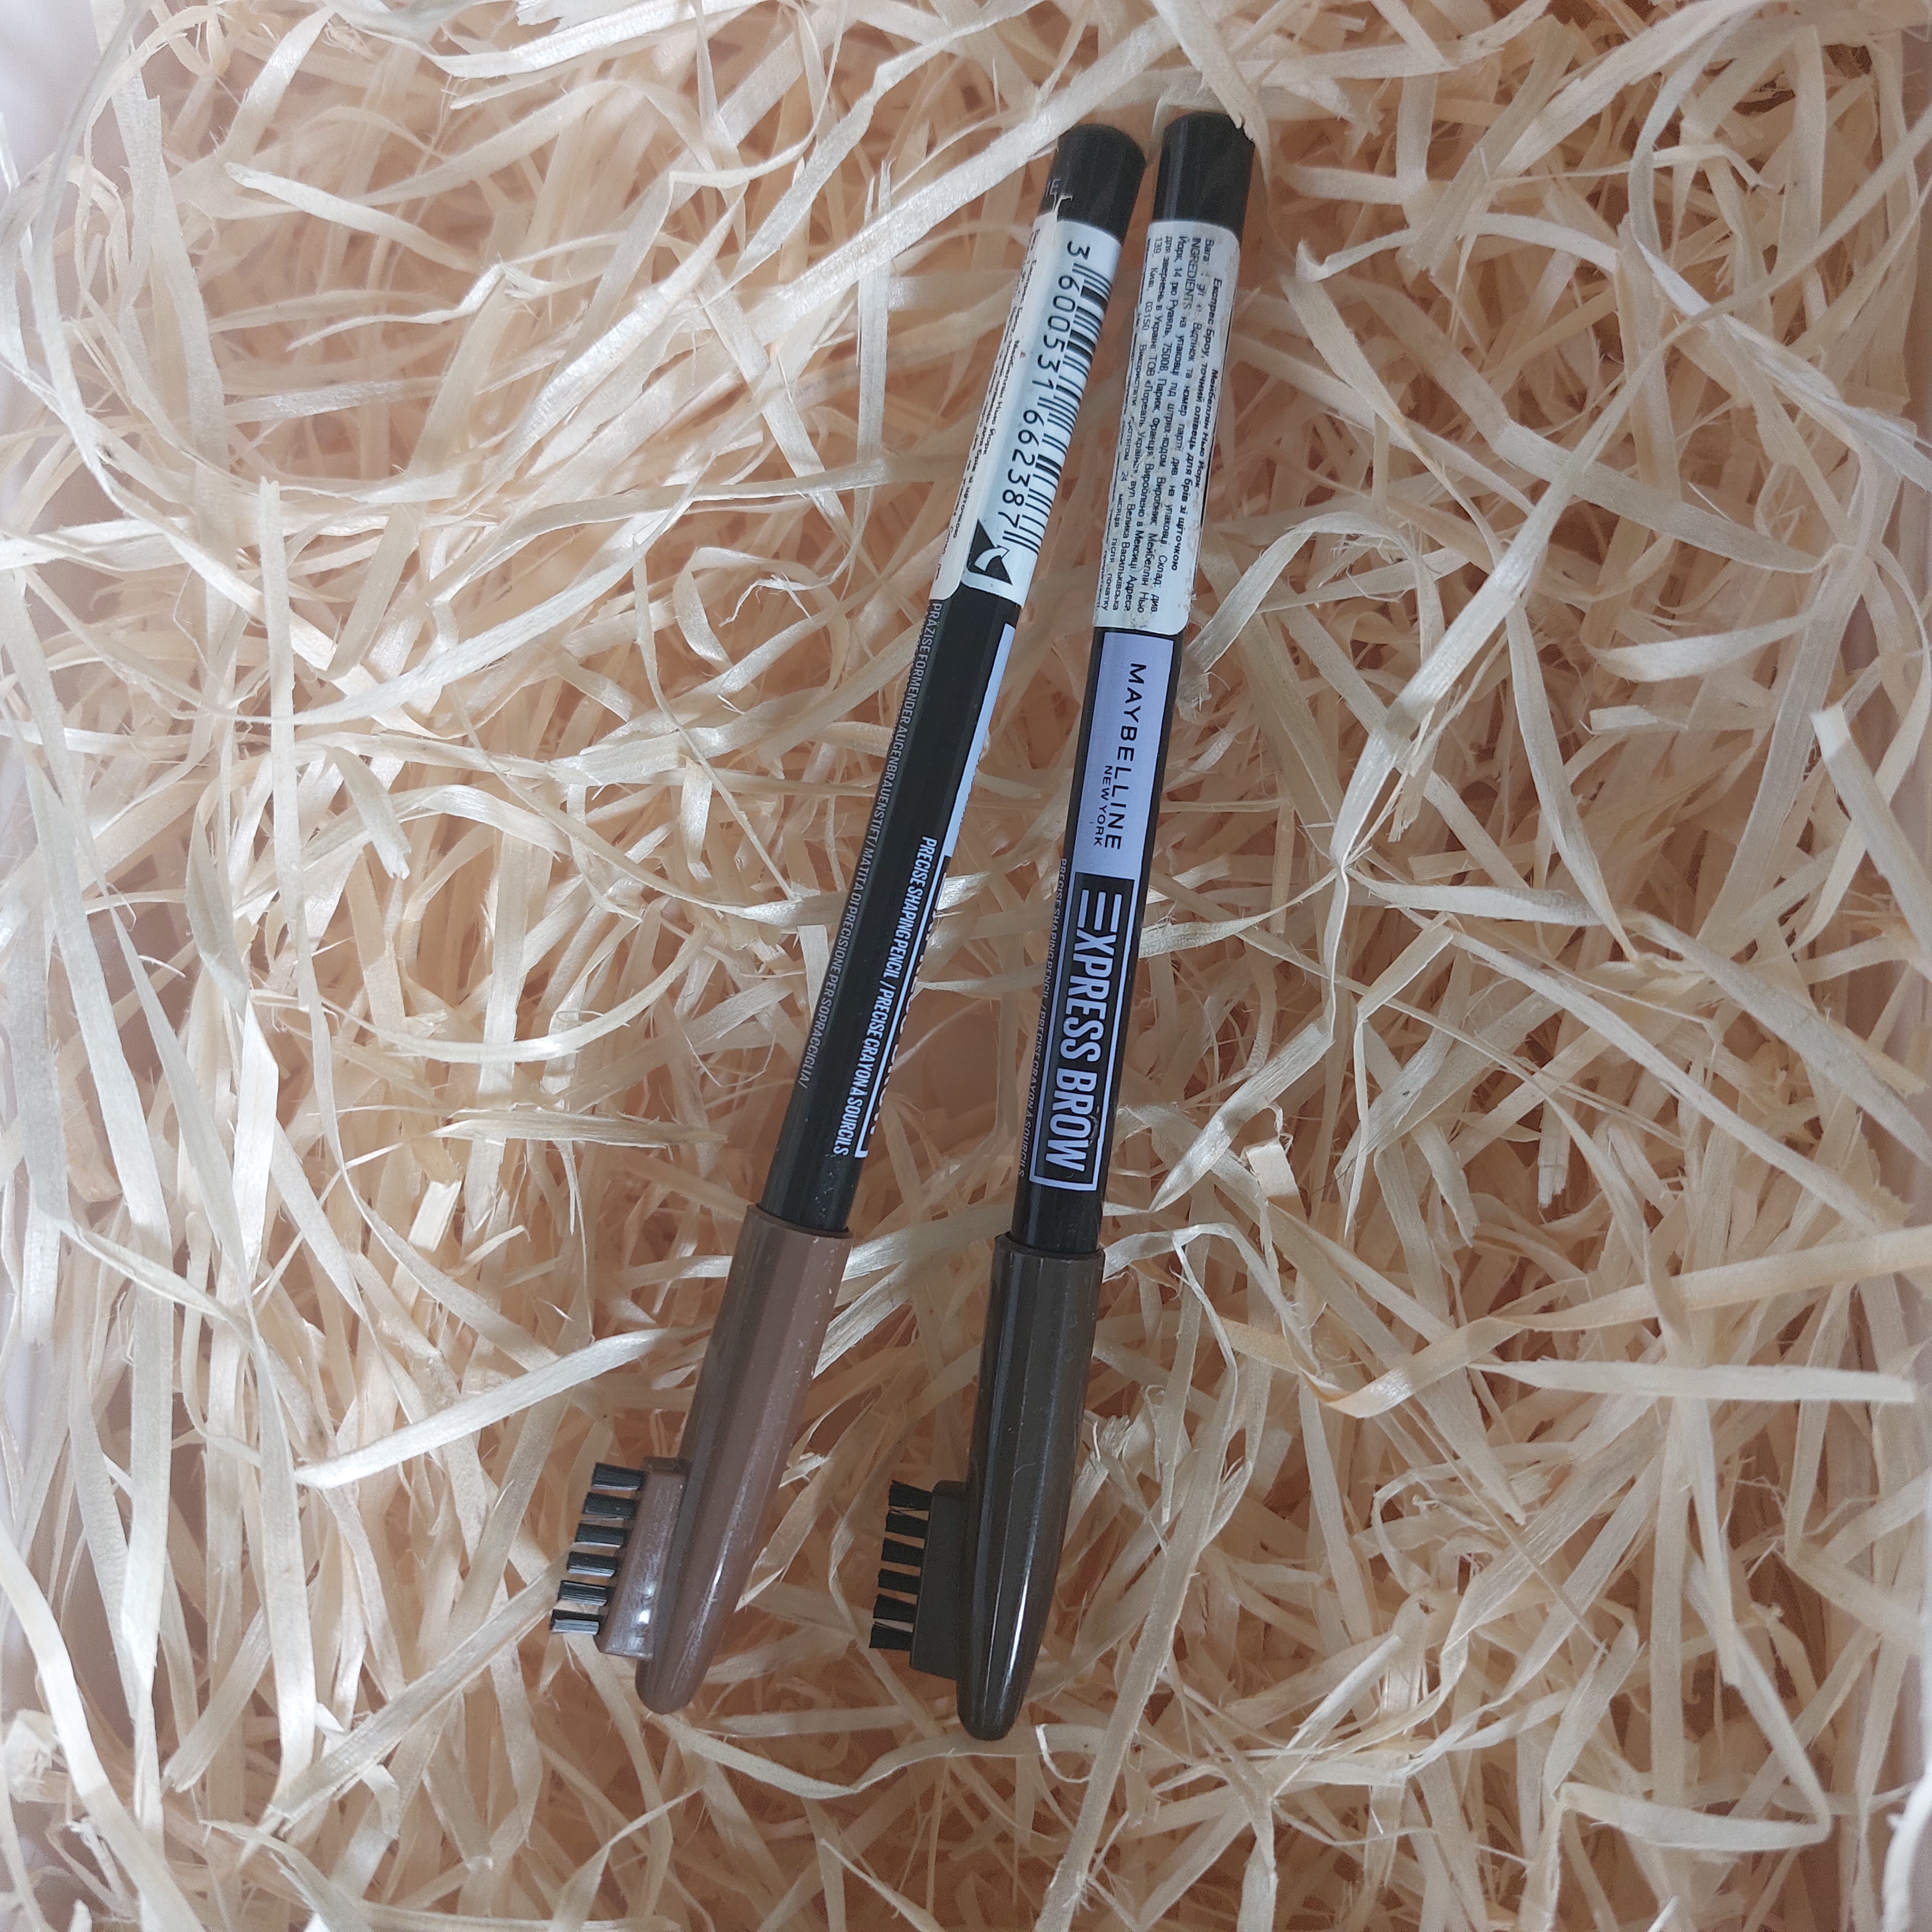 #testinmakeup Maybelline New York Express Brow Shaping Pencil